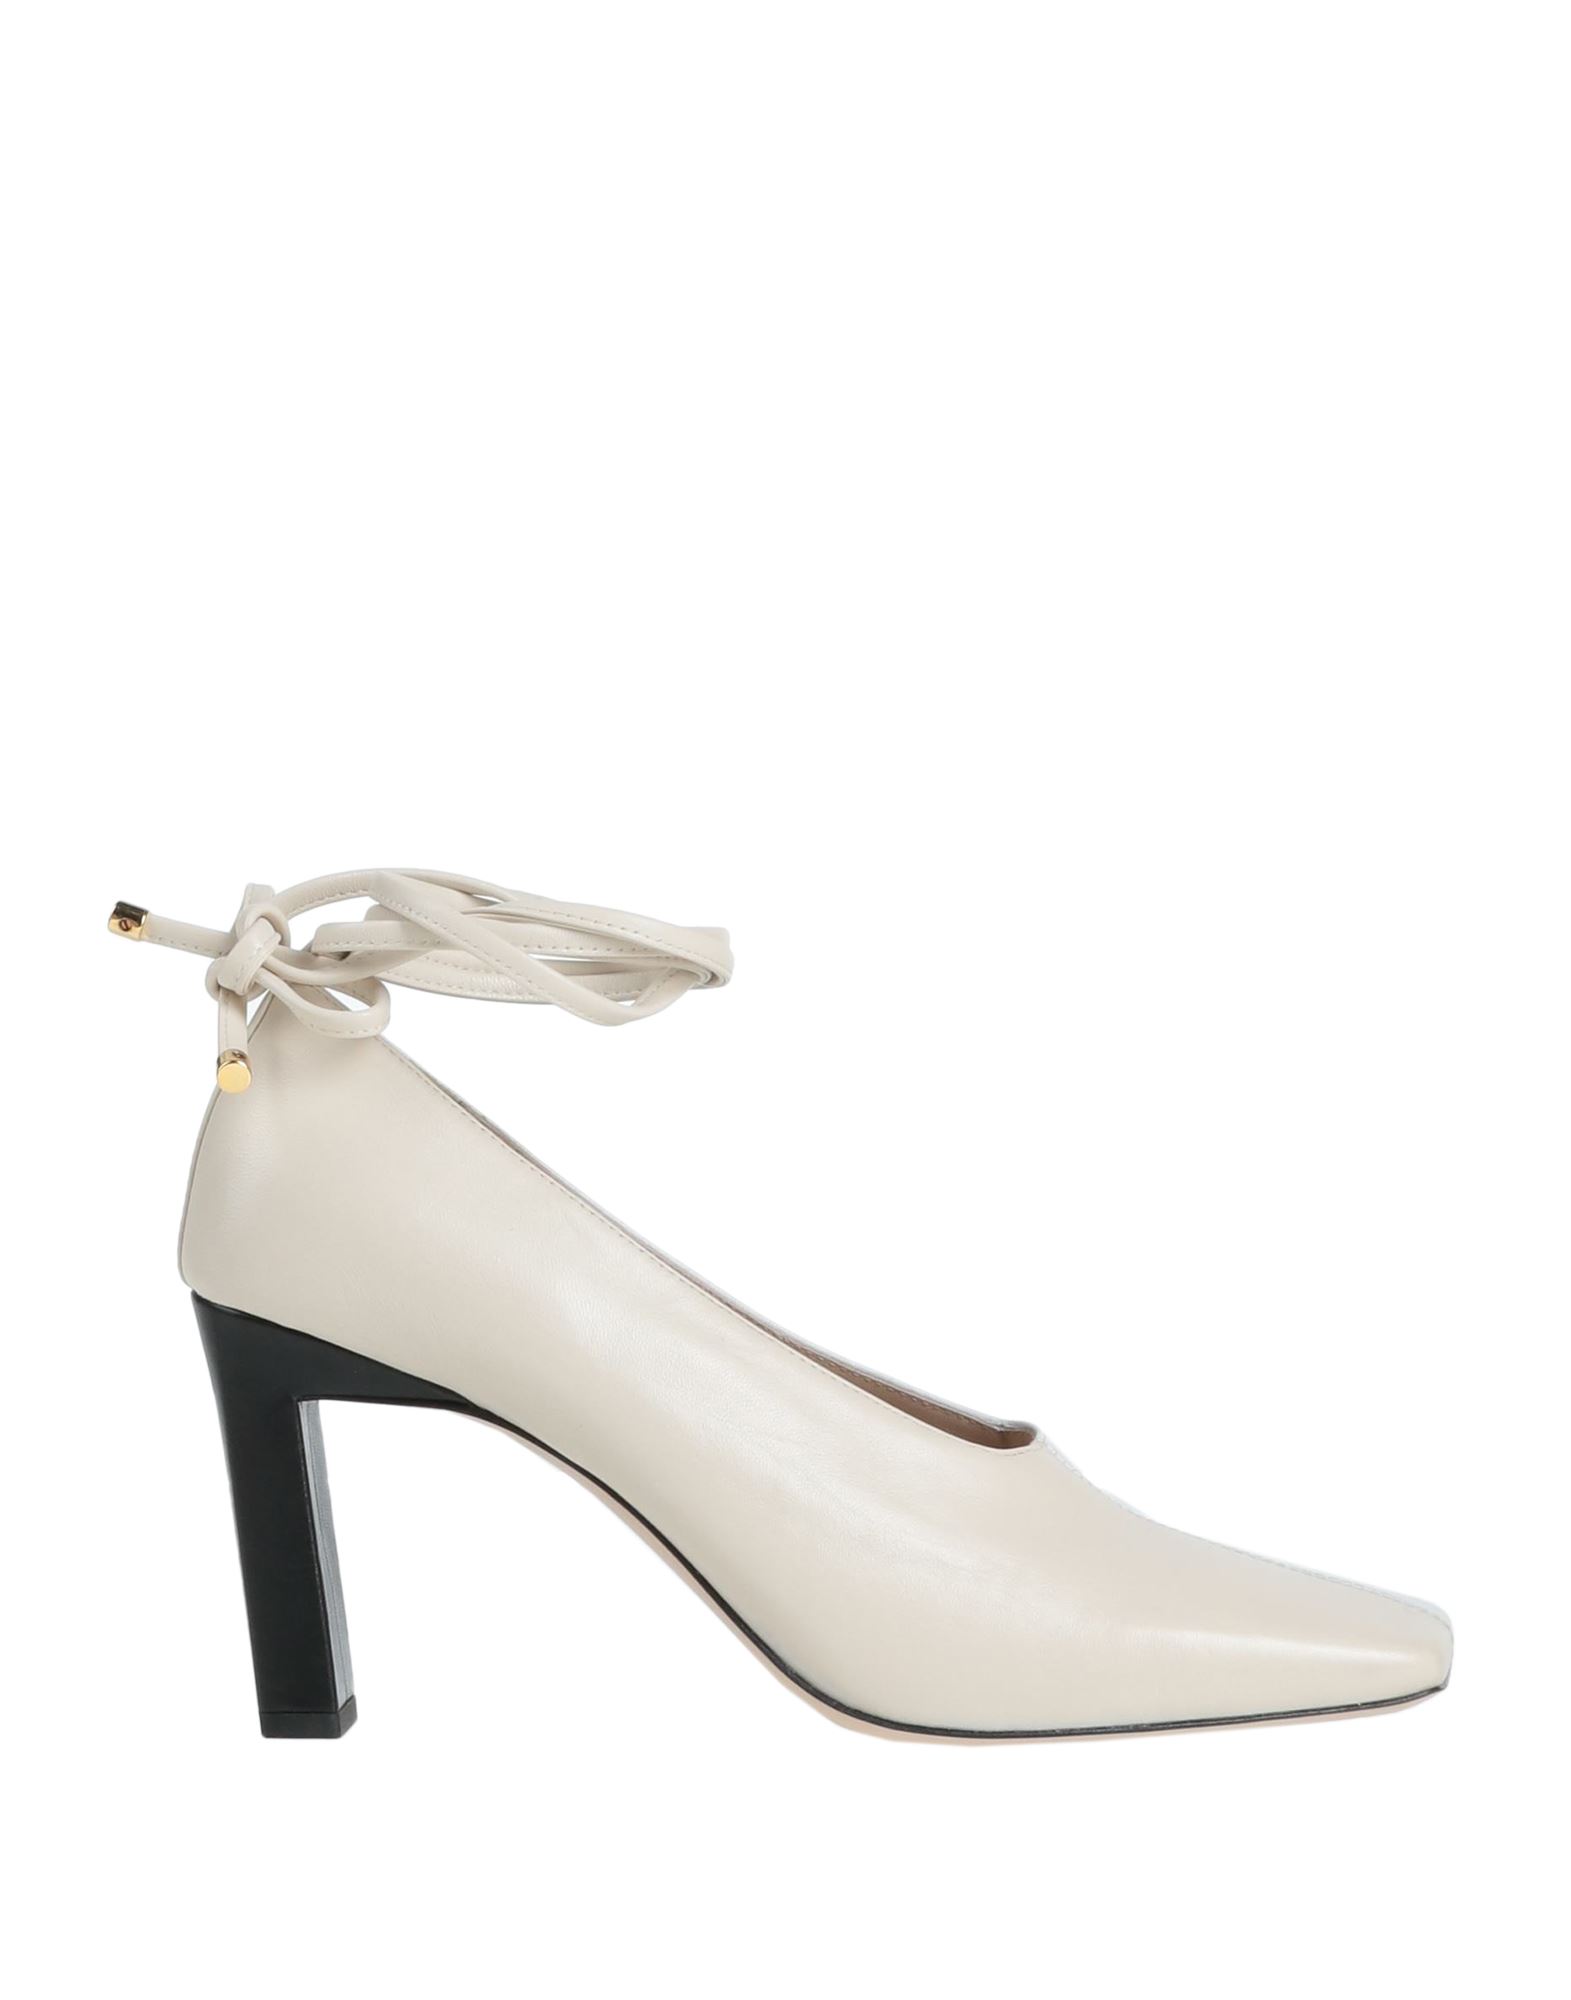 Wandler Pumps In Ivory